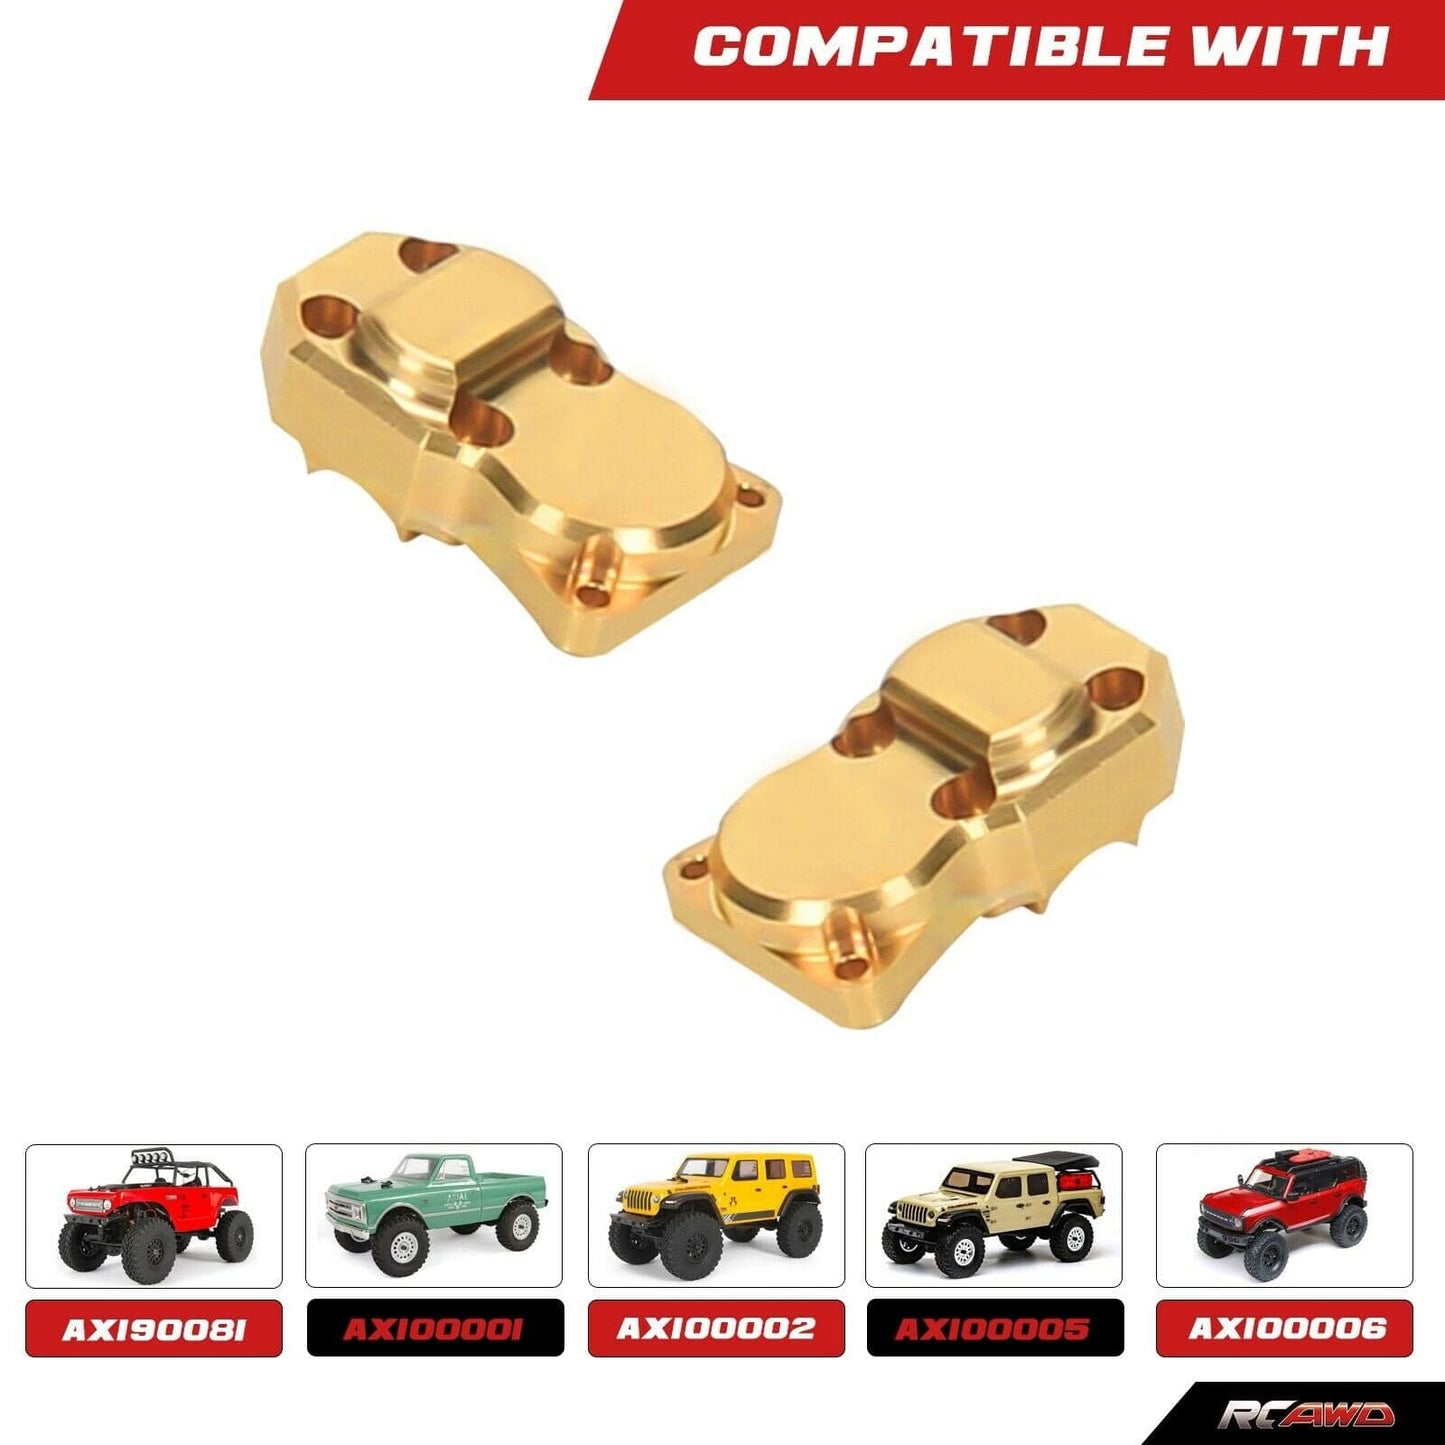 RCAWD AXIAL SCX24 SCX2407X2 RCAWD Axial SCX24 brass axle housing diff cover upgrade parts compatiable with AX24